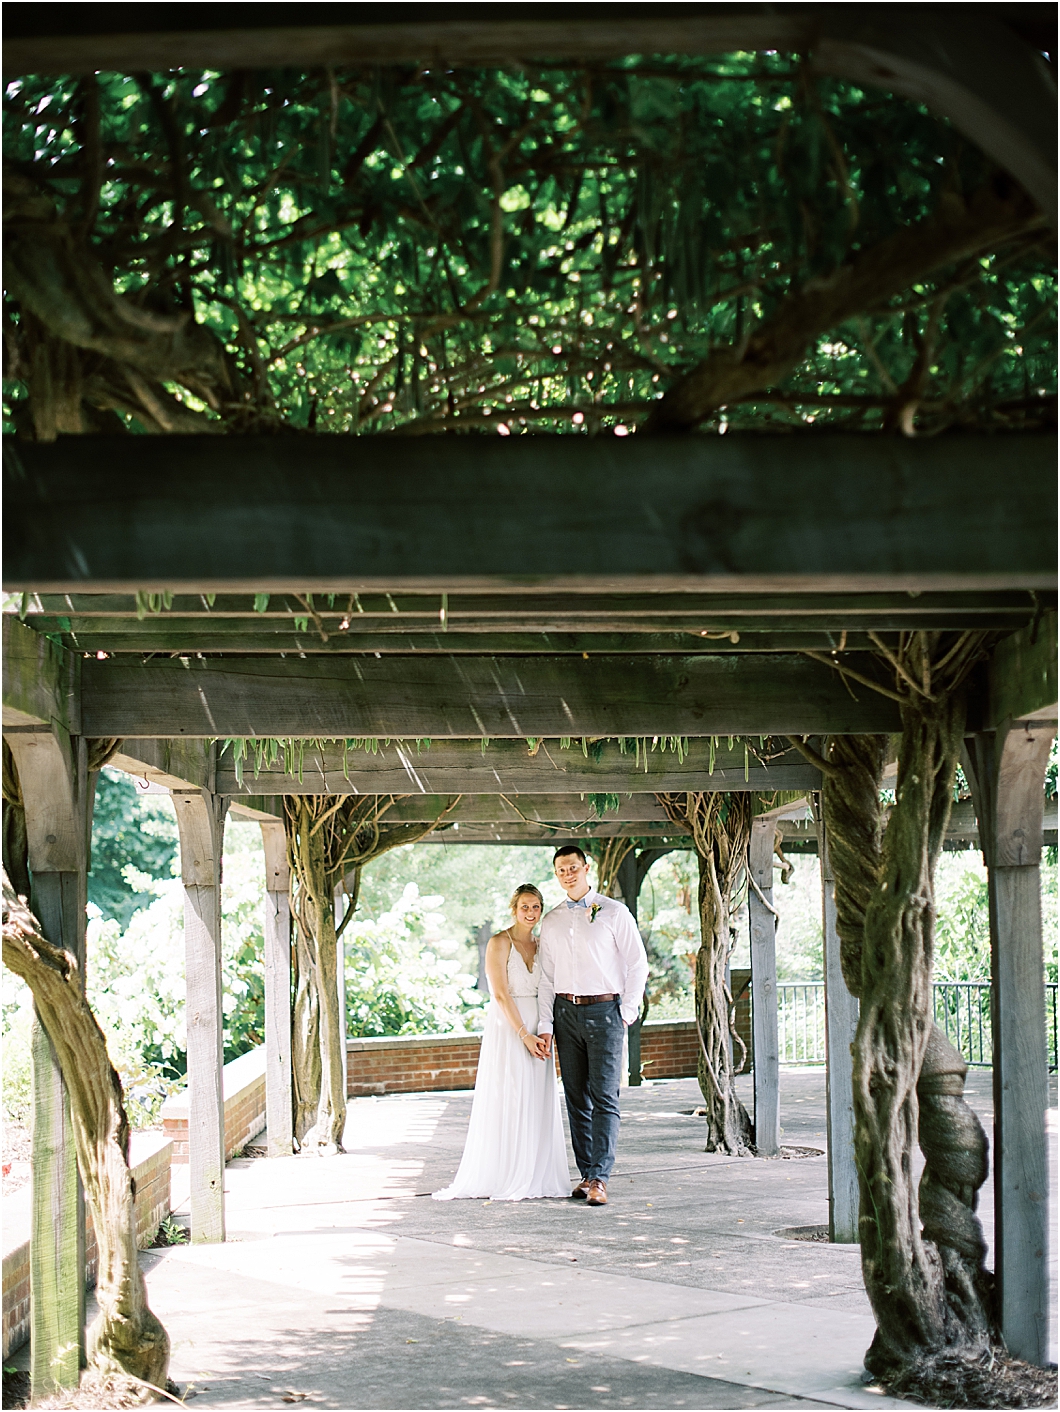 Intimate Wedding during COVID at Tanglewood Park Arboretum by Hillary Muelleck